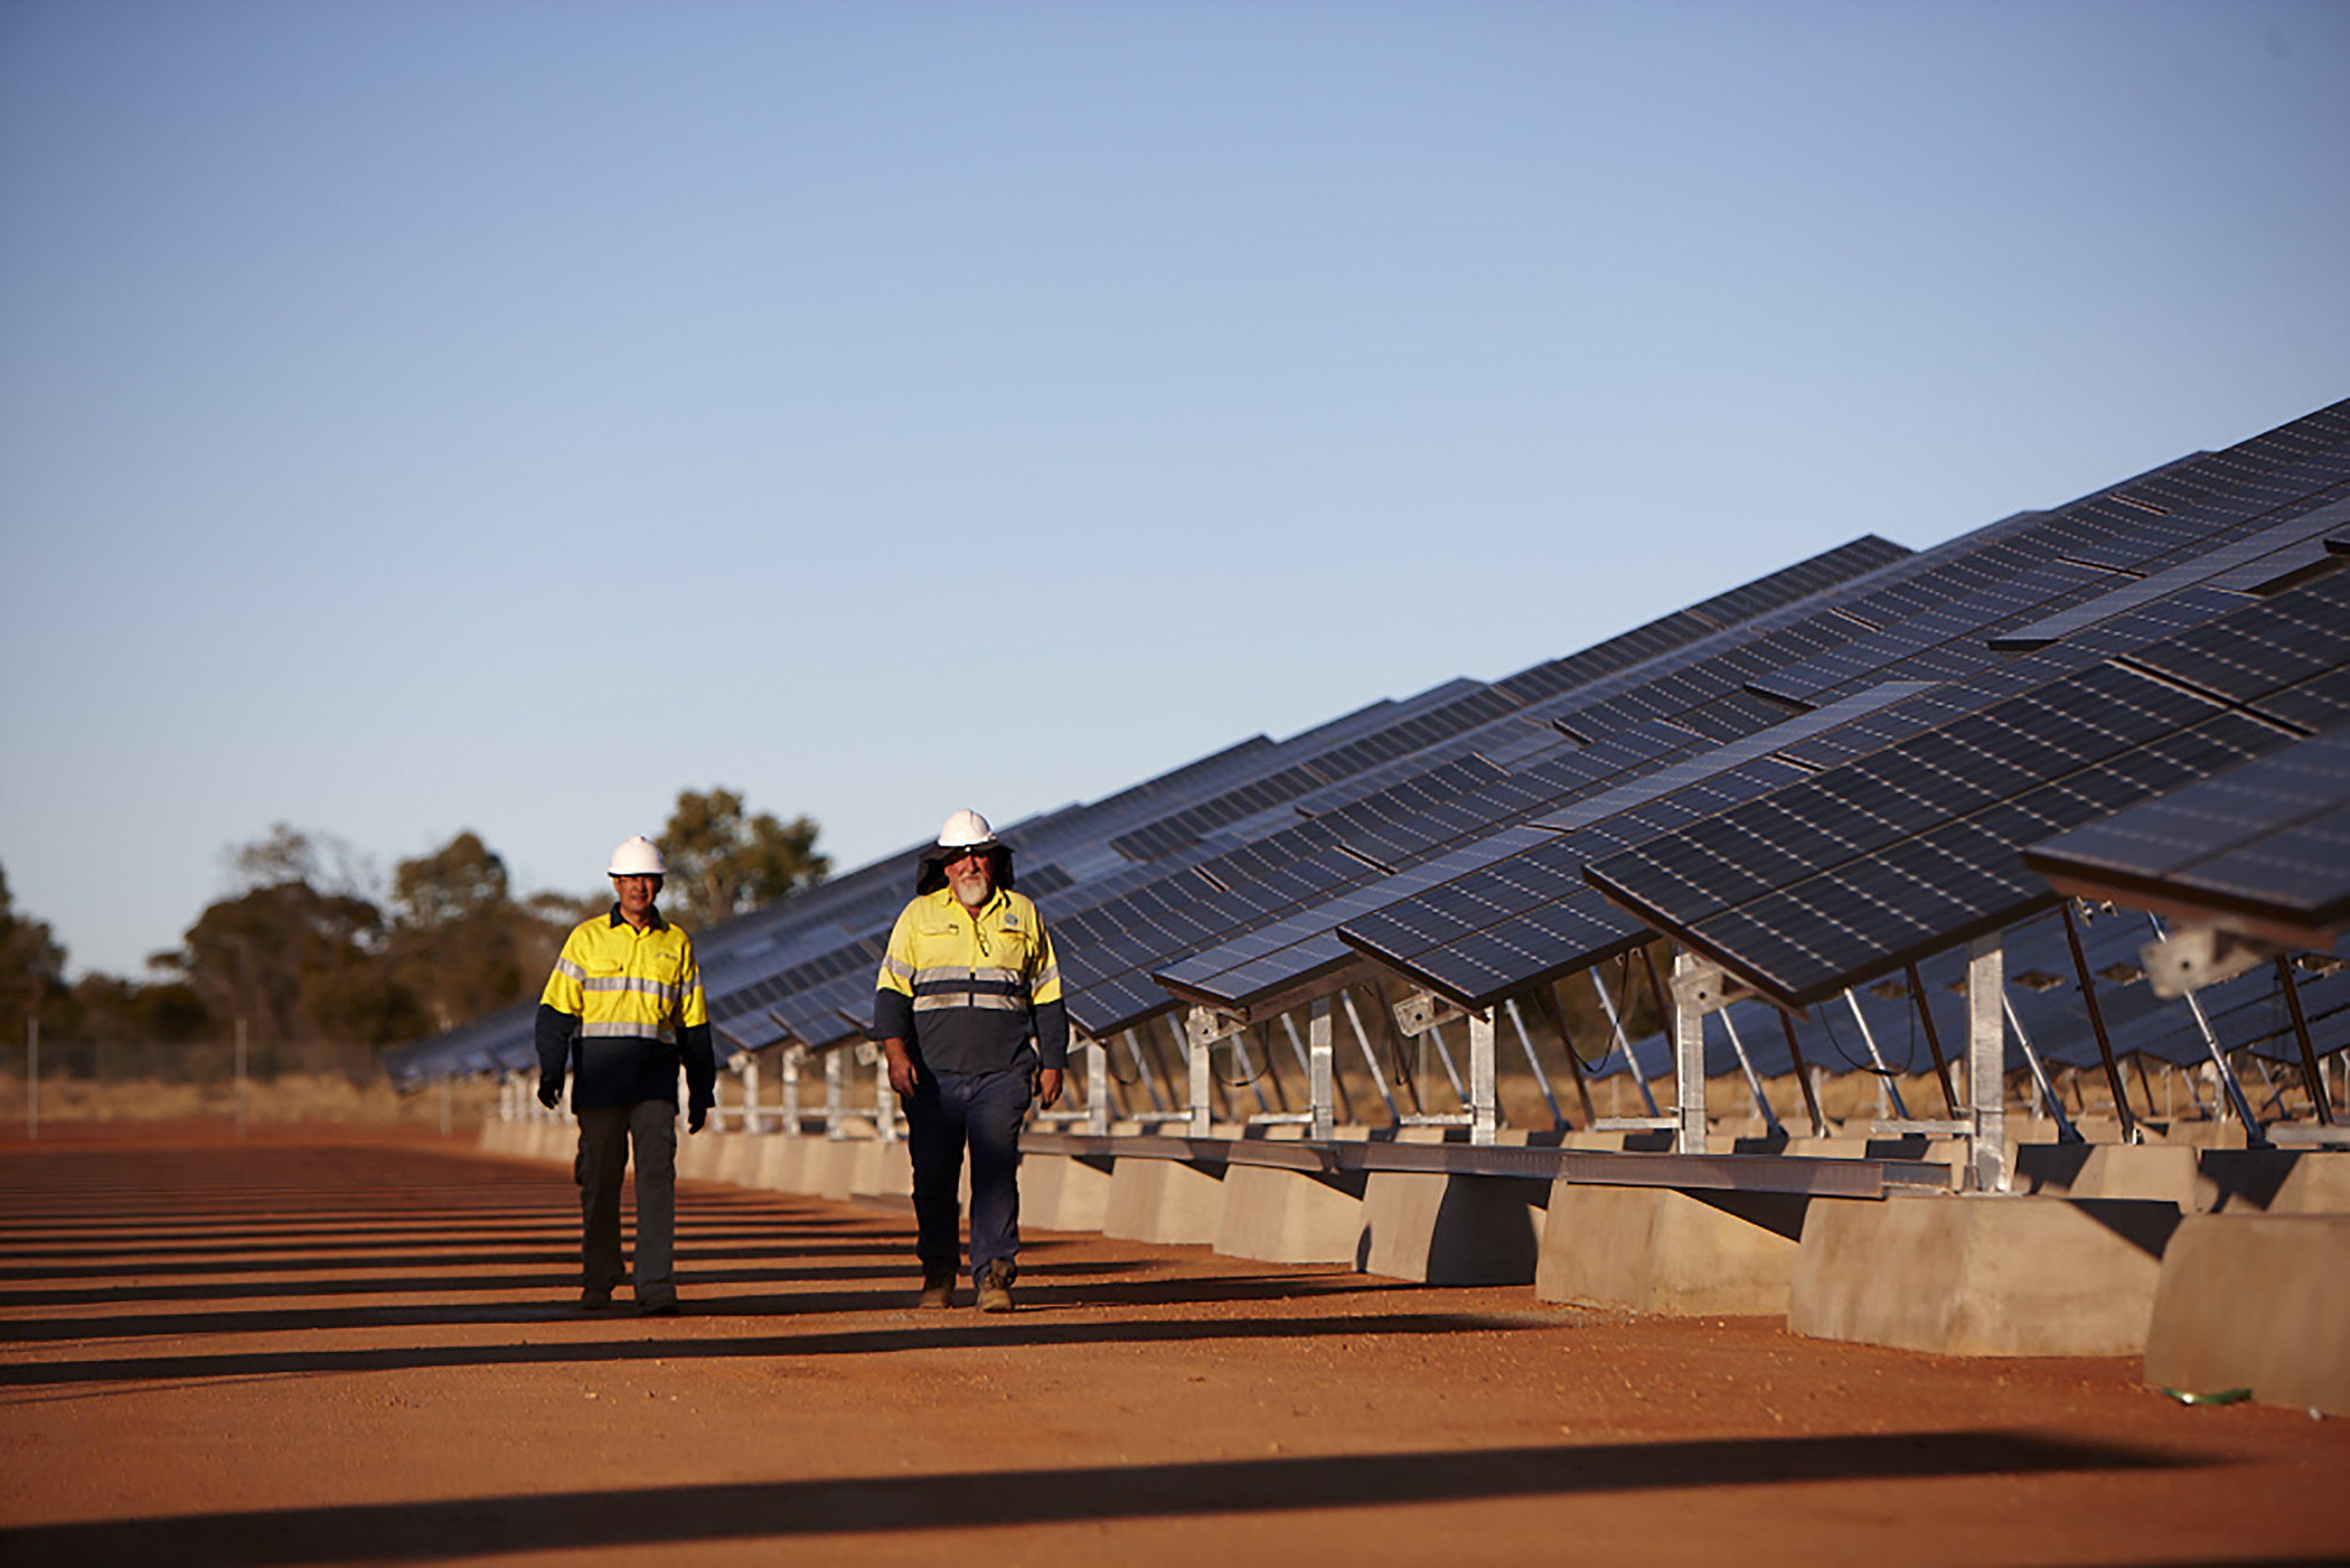 Campaign-thom-rigney-professional-photographer-advertising-commissioned-energy-mining-renewables-australia-tradesman-industry-004